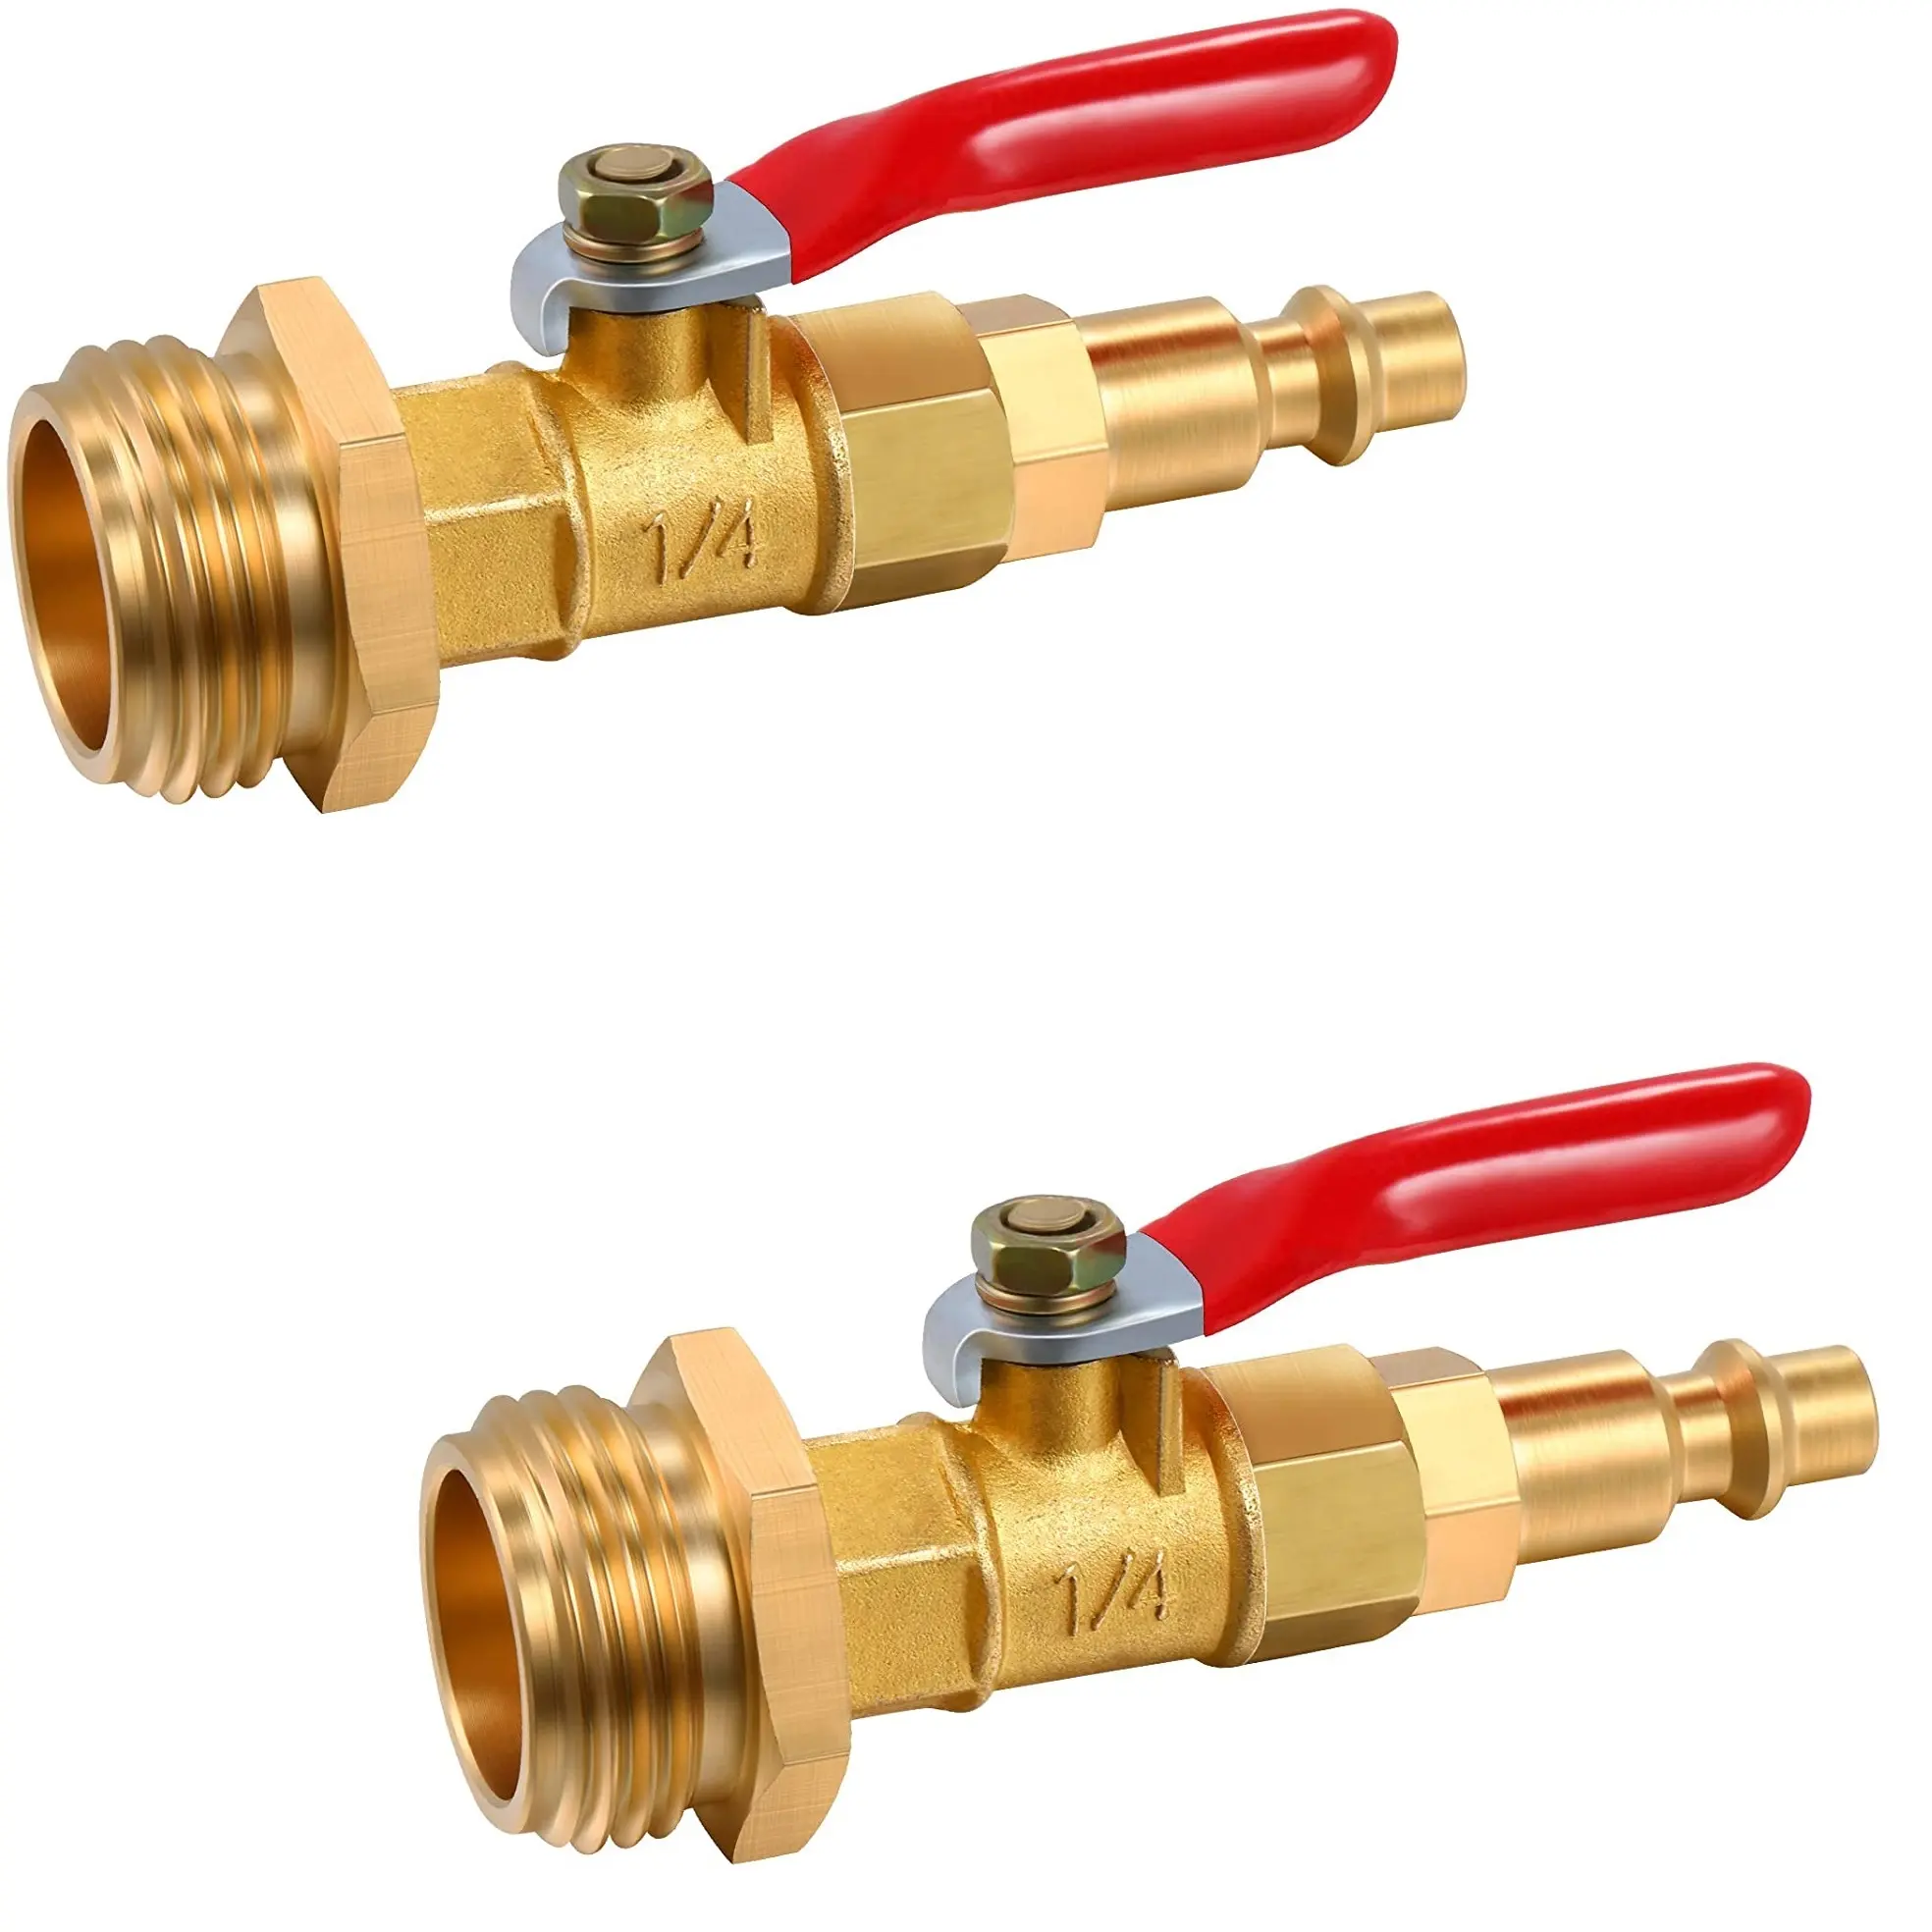 Brass Made Winterize Blowout Adapter with 1/4 Inch Ball Valve Easy Blow Out Water to Winterize